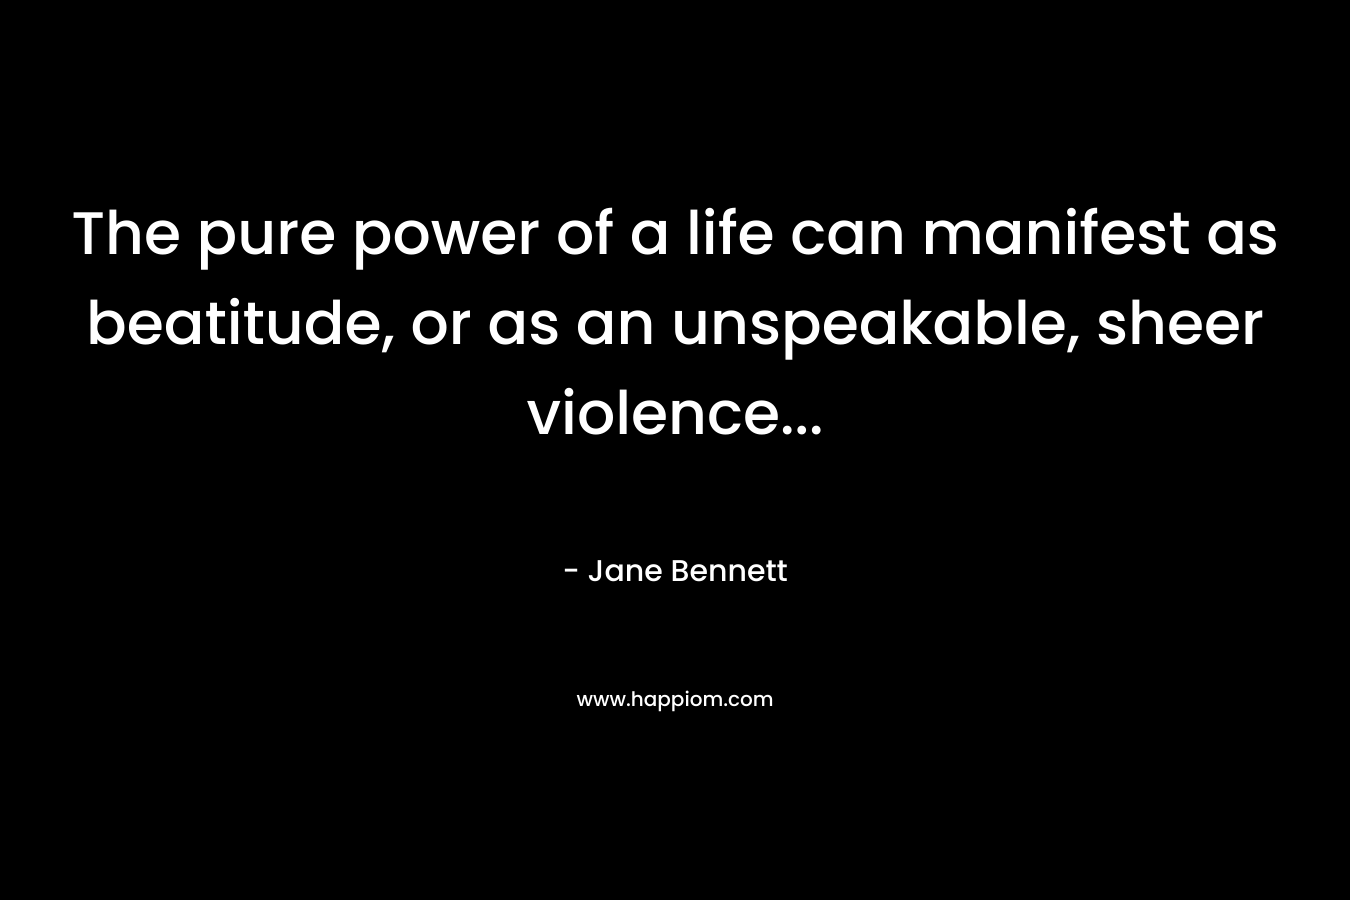 The pure power of a life can manifest as beatitude, or as an unspeakable, sheer violence… – Jane Bennett